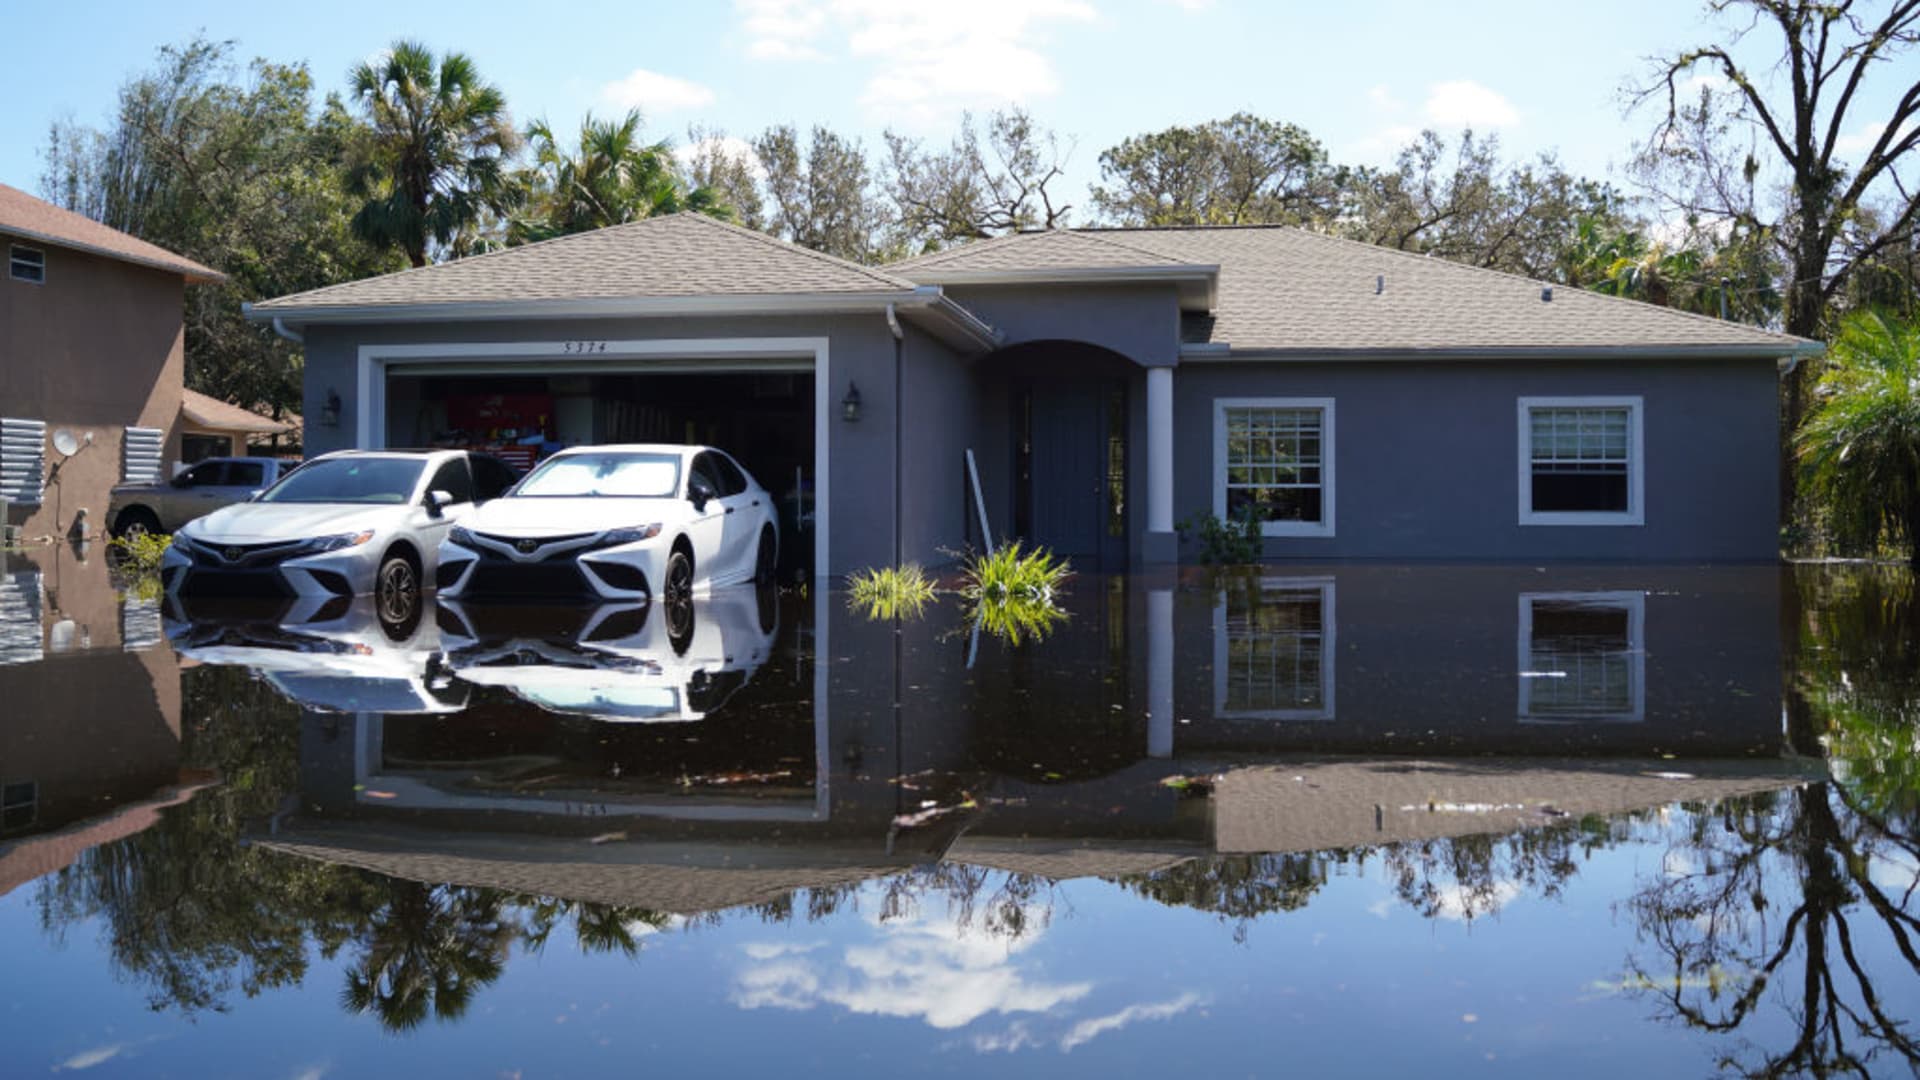 A view from the area after Hurricane Ian hits Florida on September 30, 2022 in North Port, Florida, United States. The storm has caused widespread power outages and flash flooding in Central Florida as it crossed through the state after making landfall in the Fort Myers area as a Category 4 hurricane.